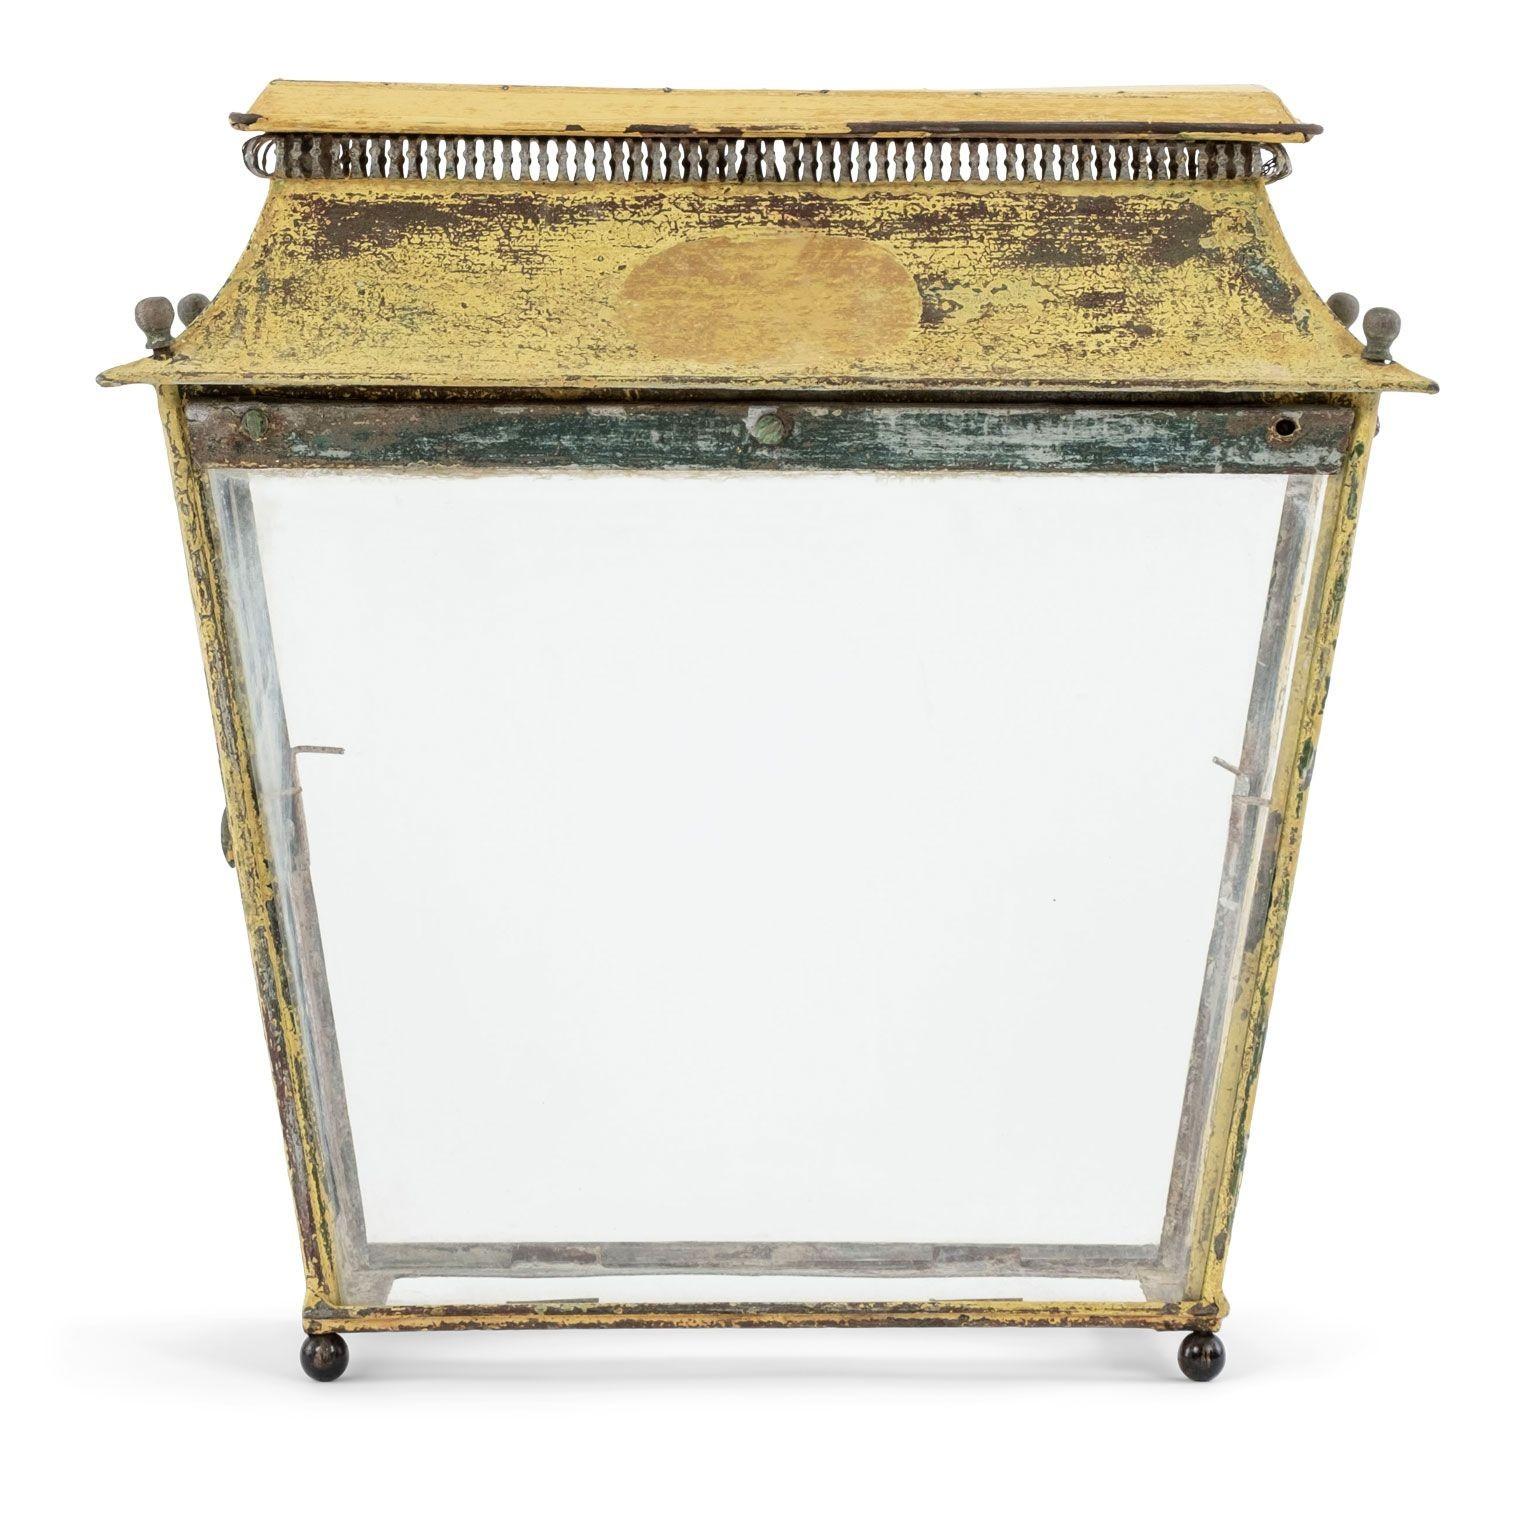 Yellow painted French tole lantern. 19th century lantern with glass-paneled sides. Suitable for a table top or can be wall-mounted with the addition of a bracket. Lantern is not electrified, but can be wired, or fitted for gas usage, for additional